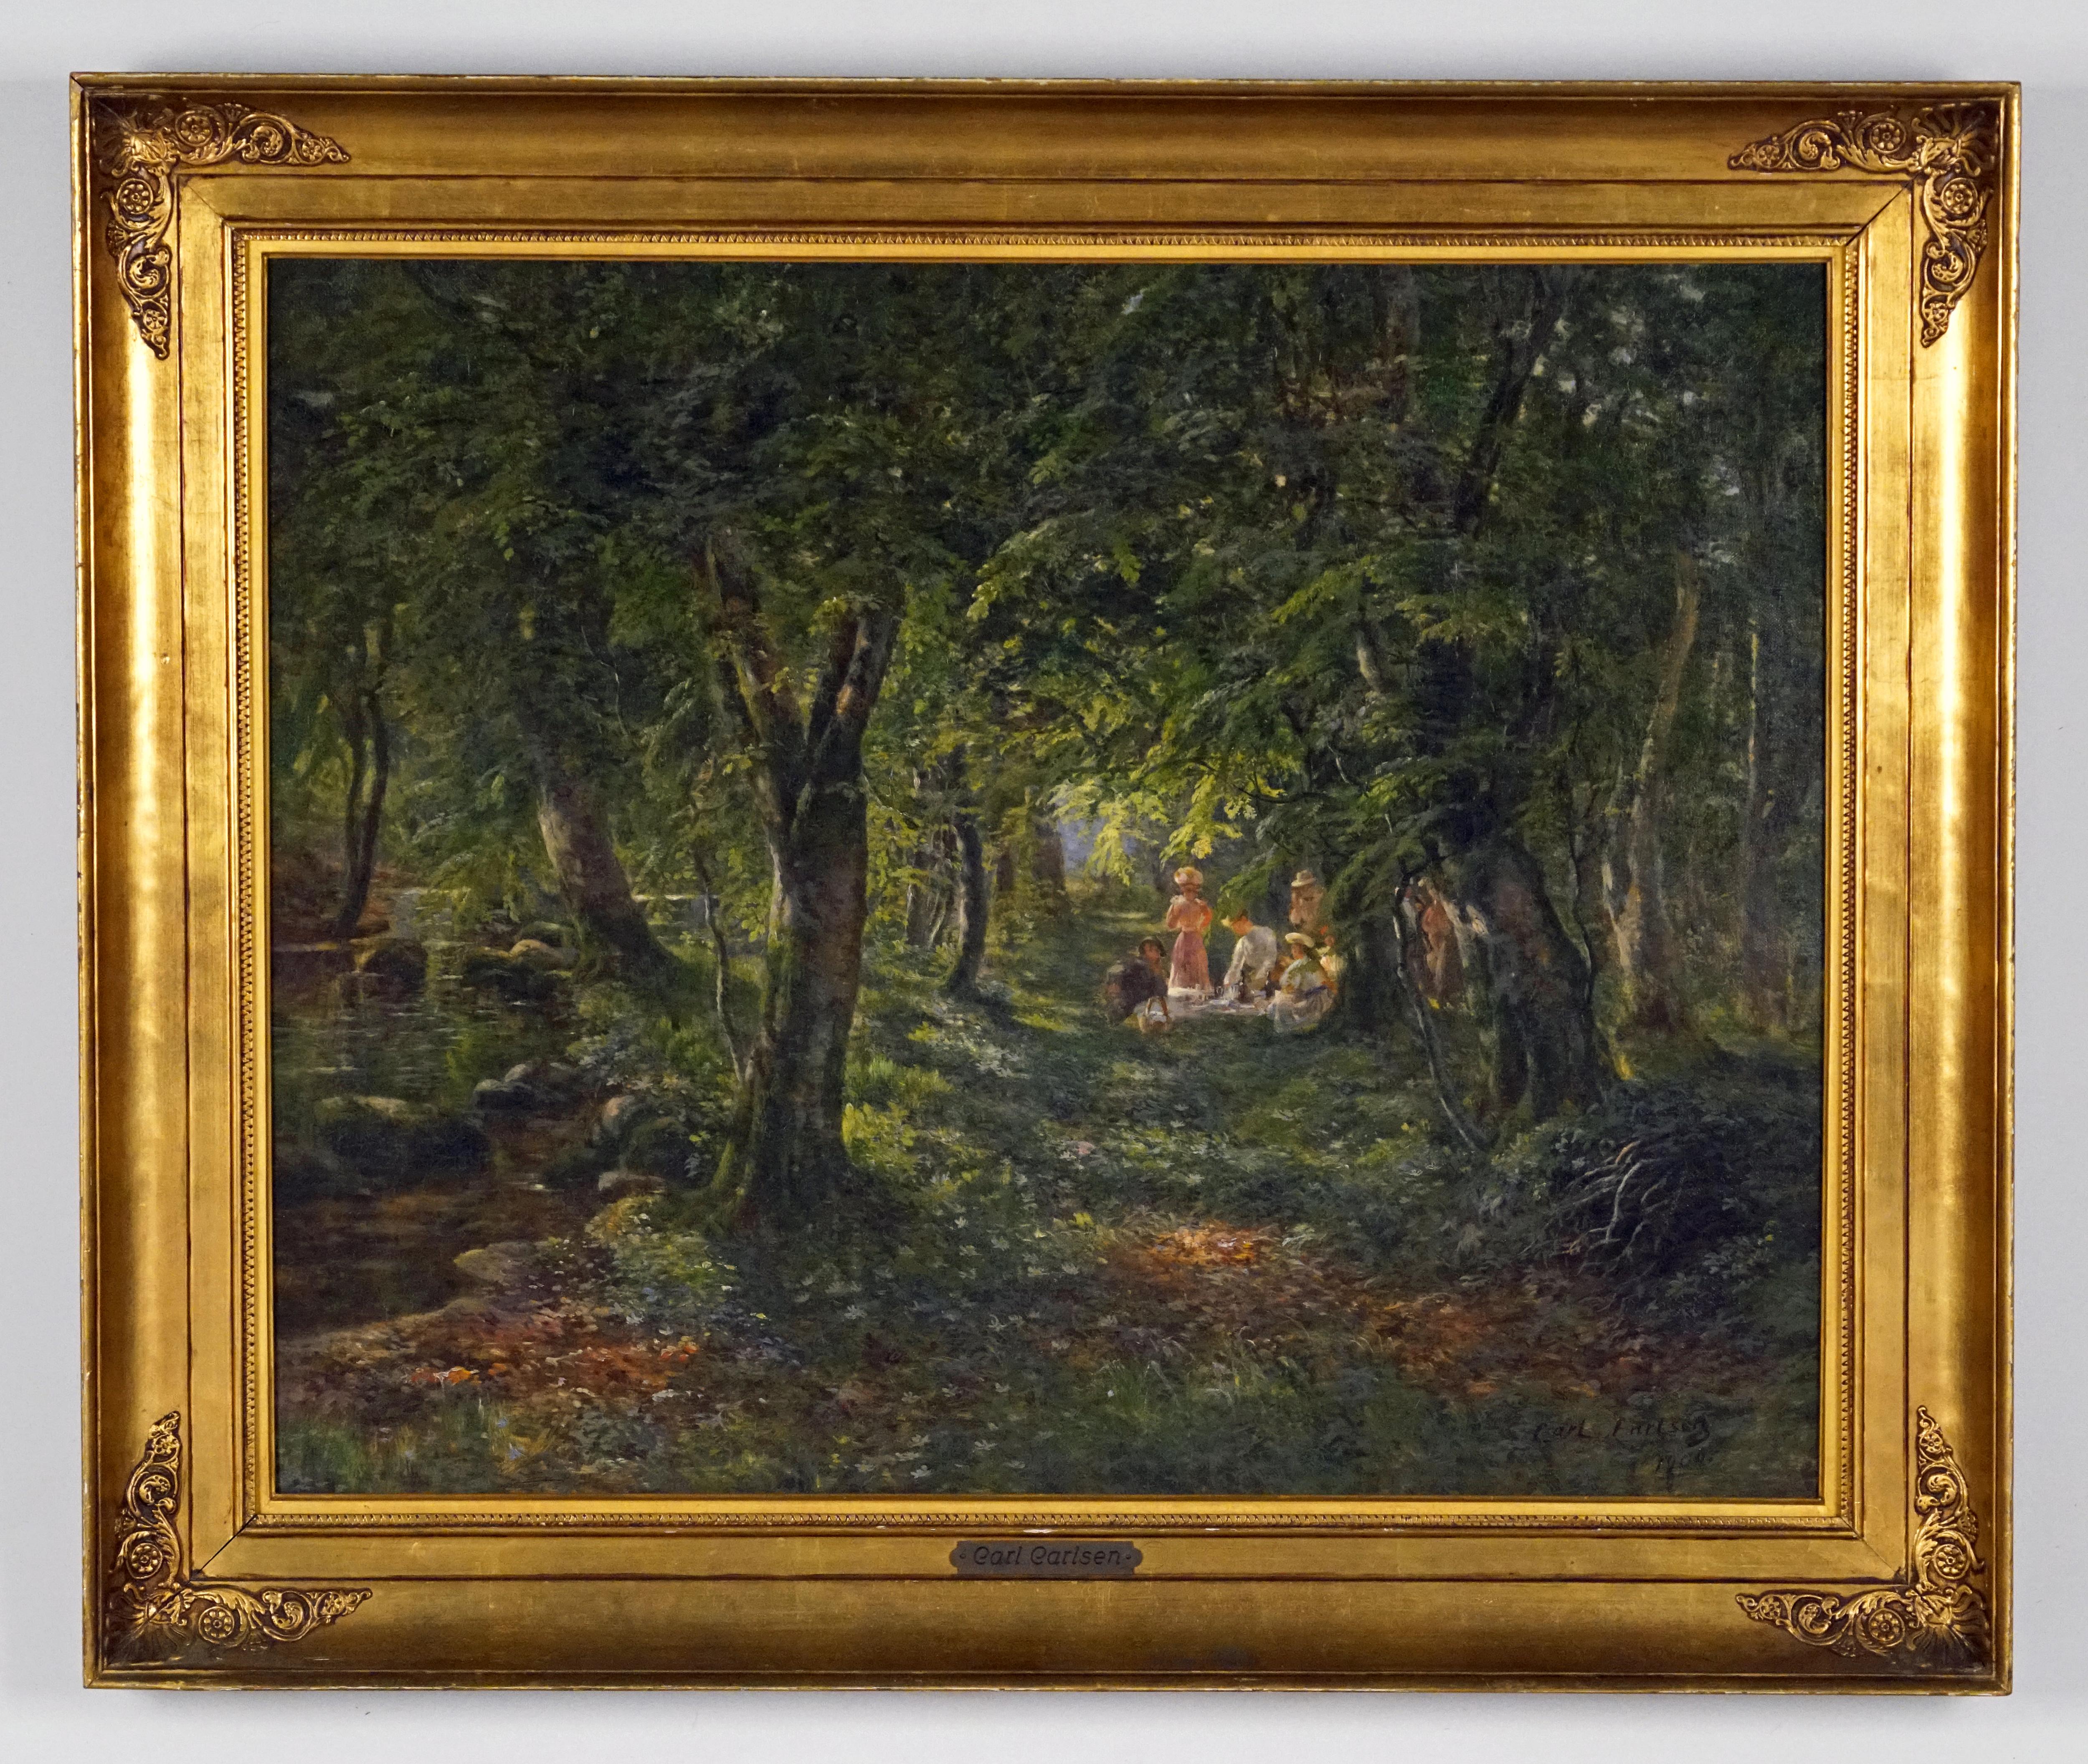 Figures in the Forest - Painting by Carl Carlsen